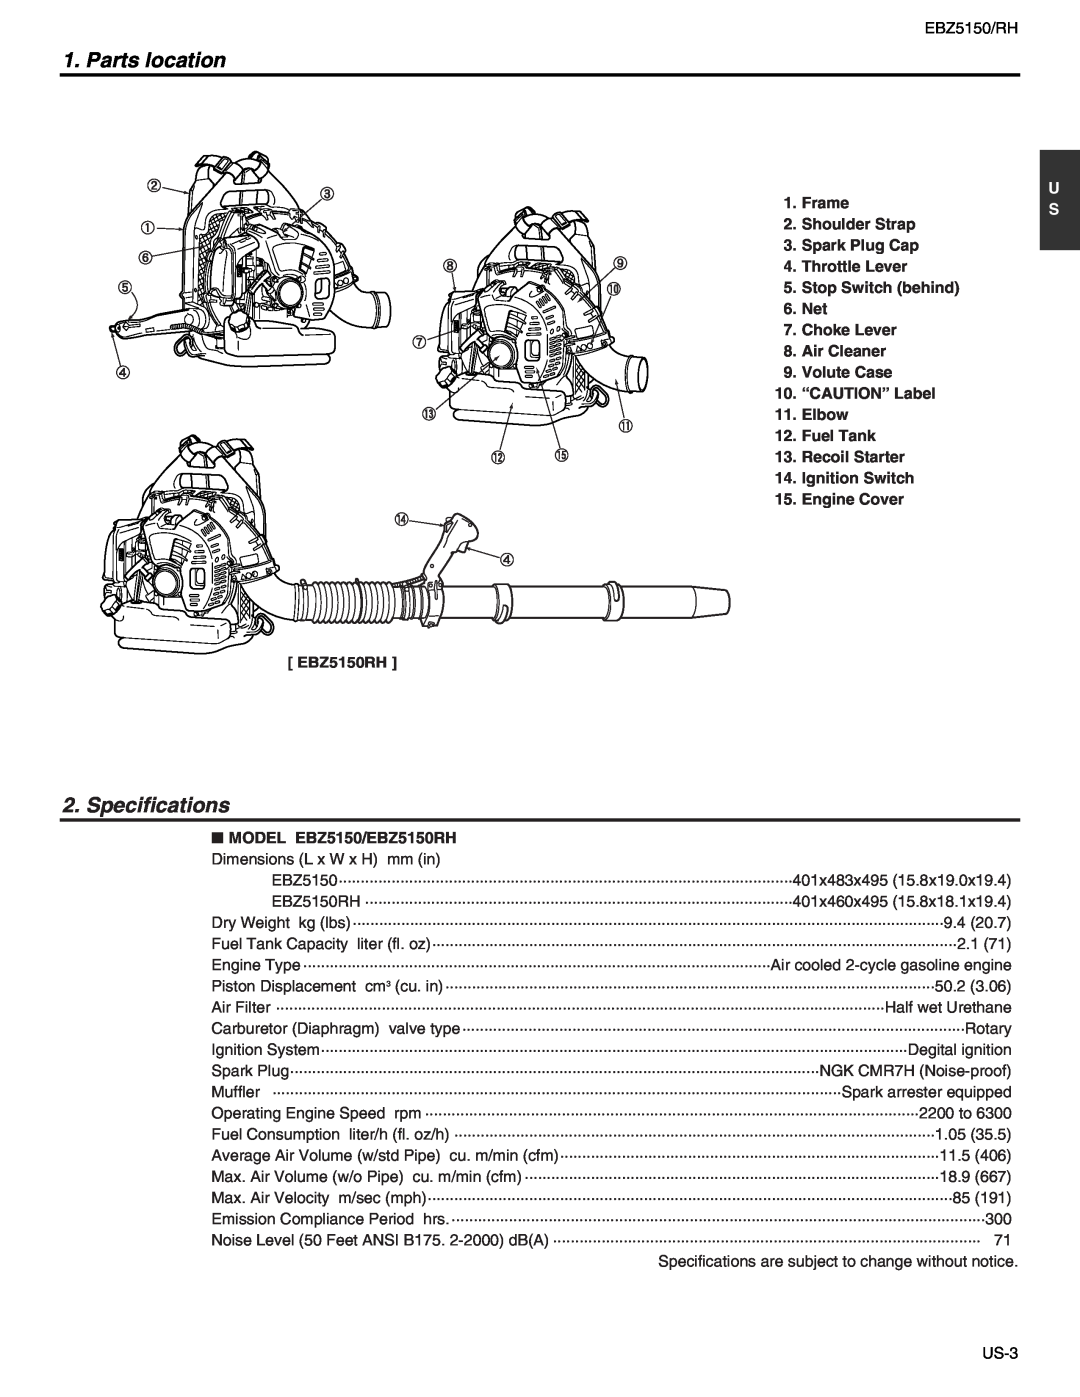 RedMax EBZ5150RH manual Parts location, Specifications 